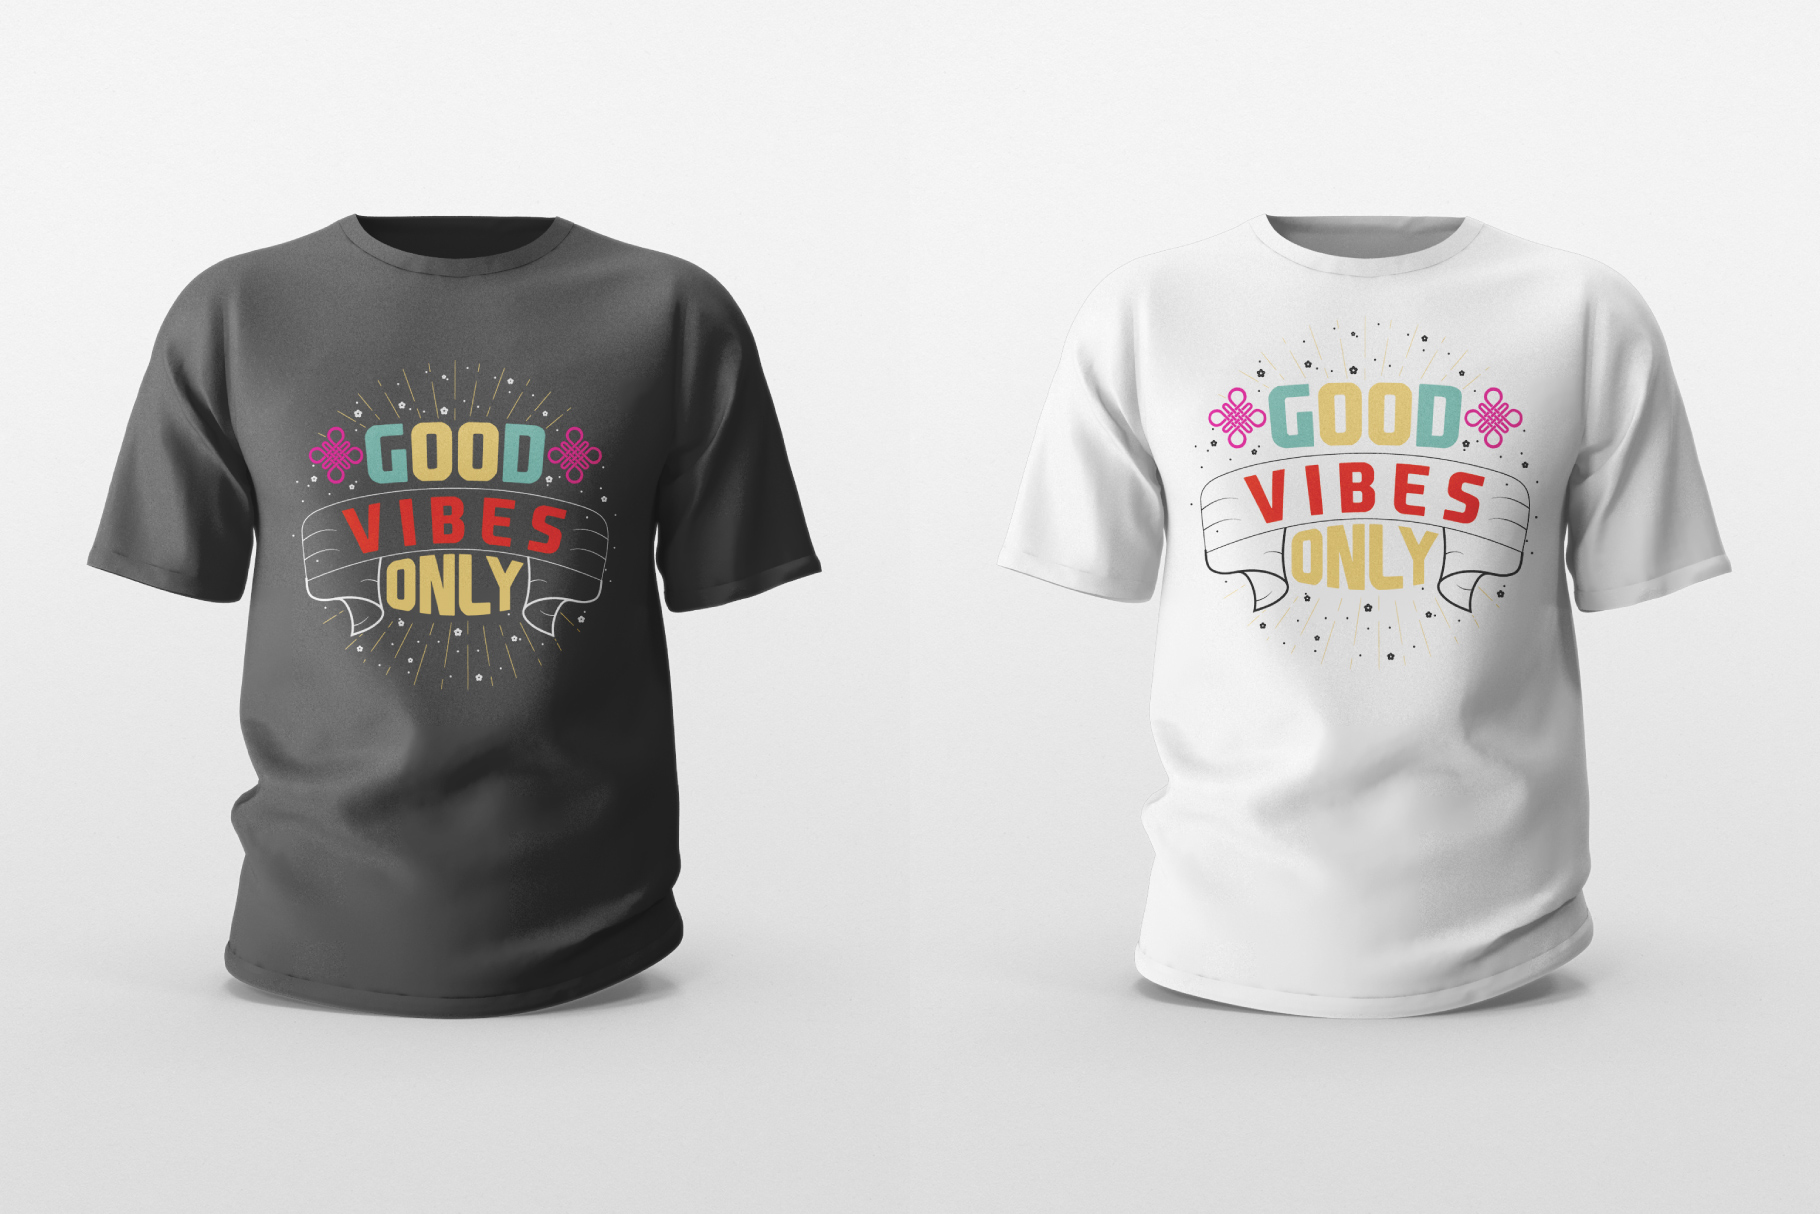 Two t - shirts that say good vibes only and good vibes only.